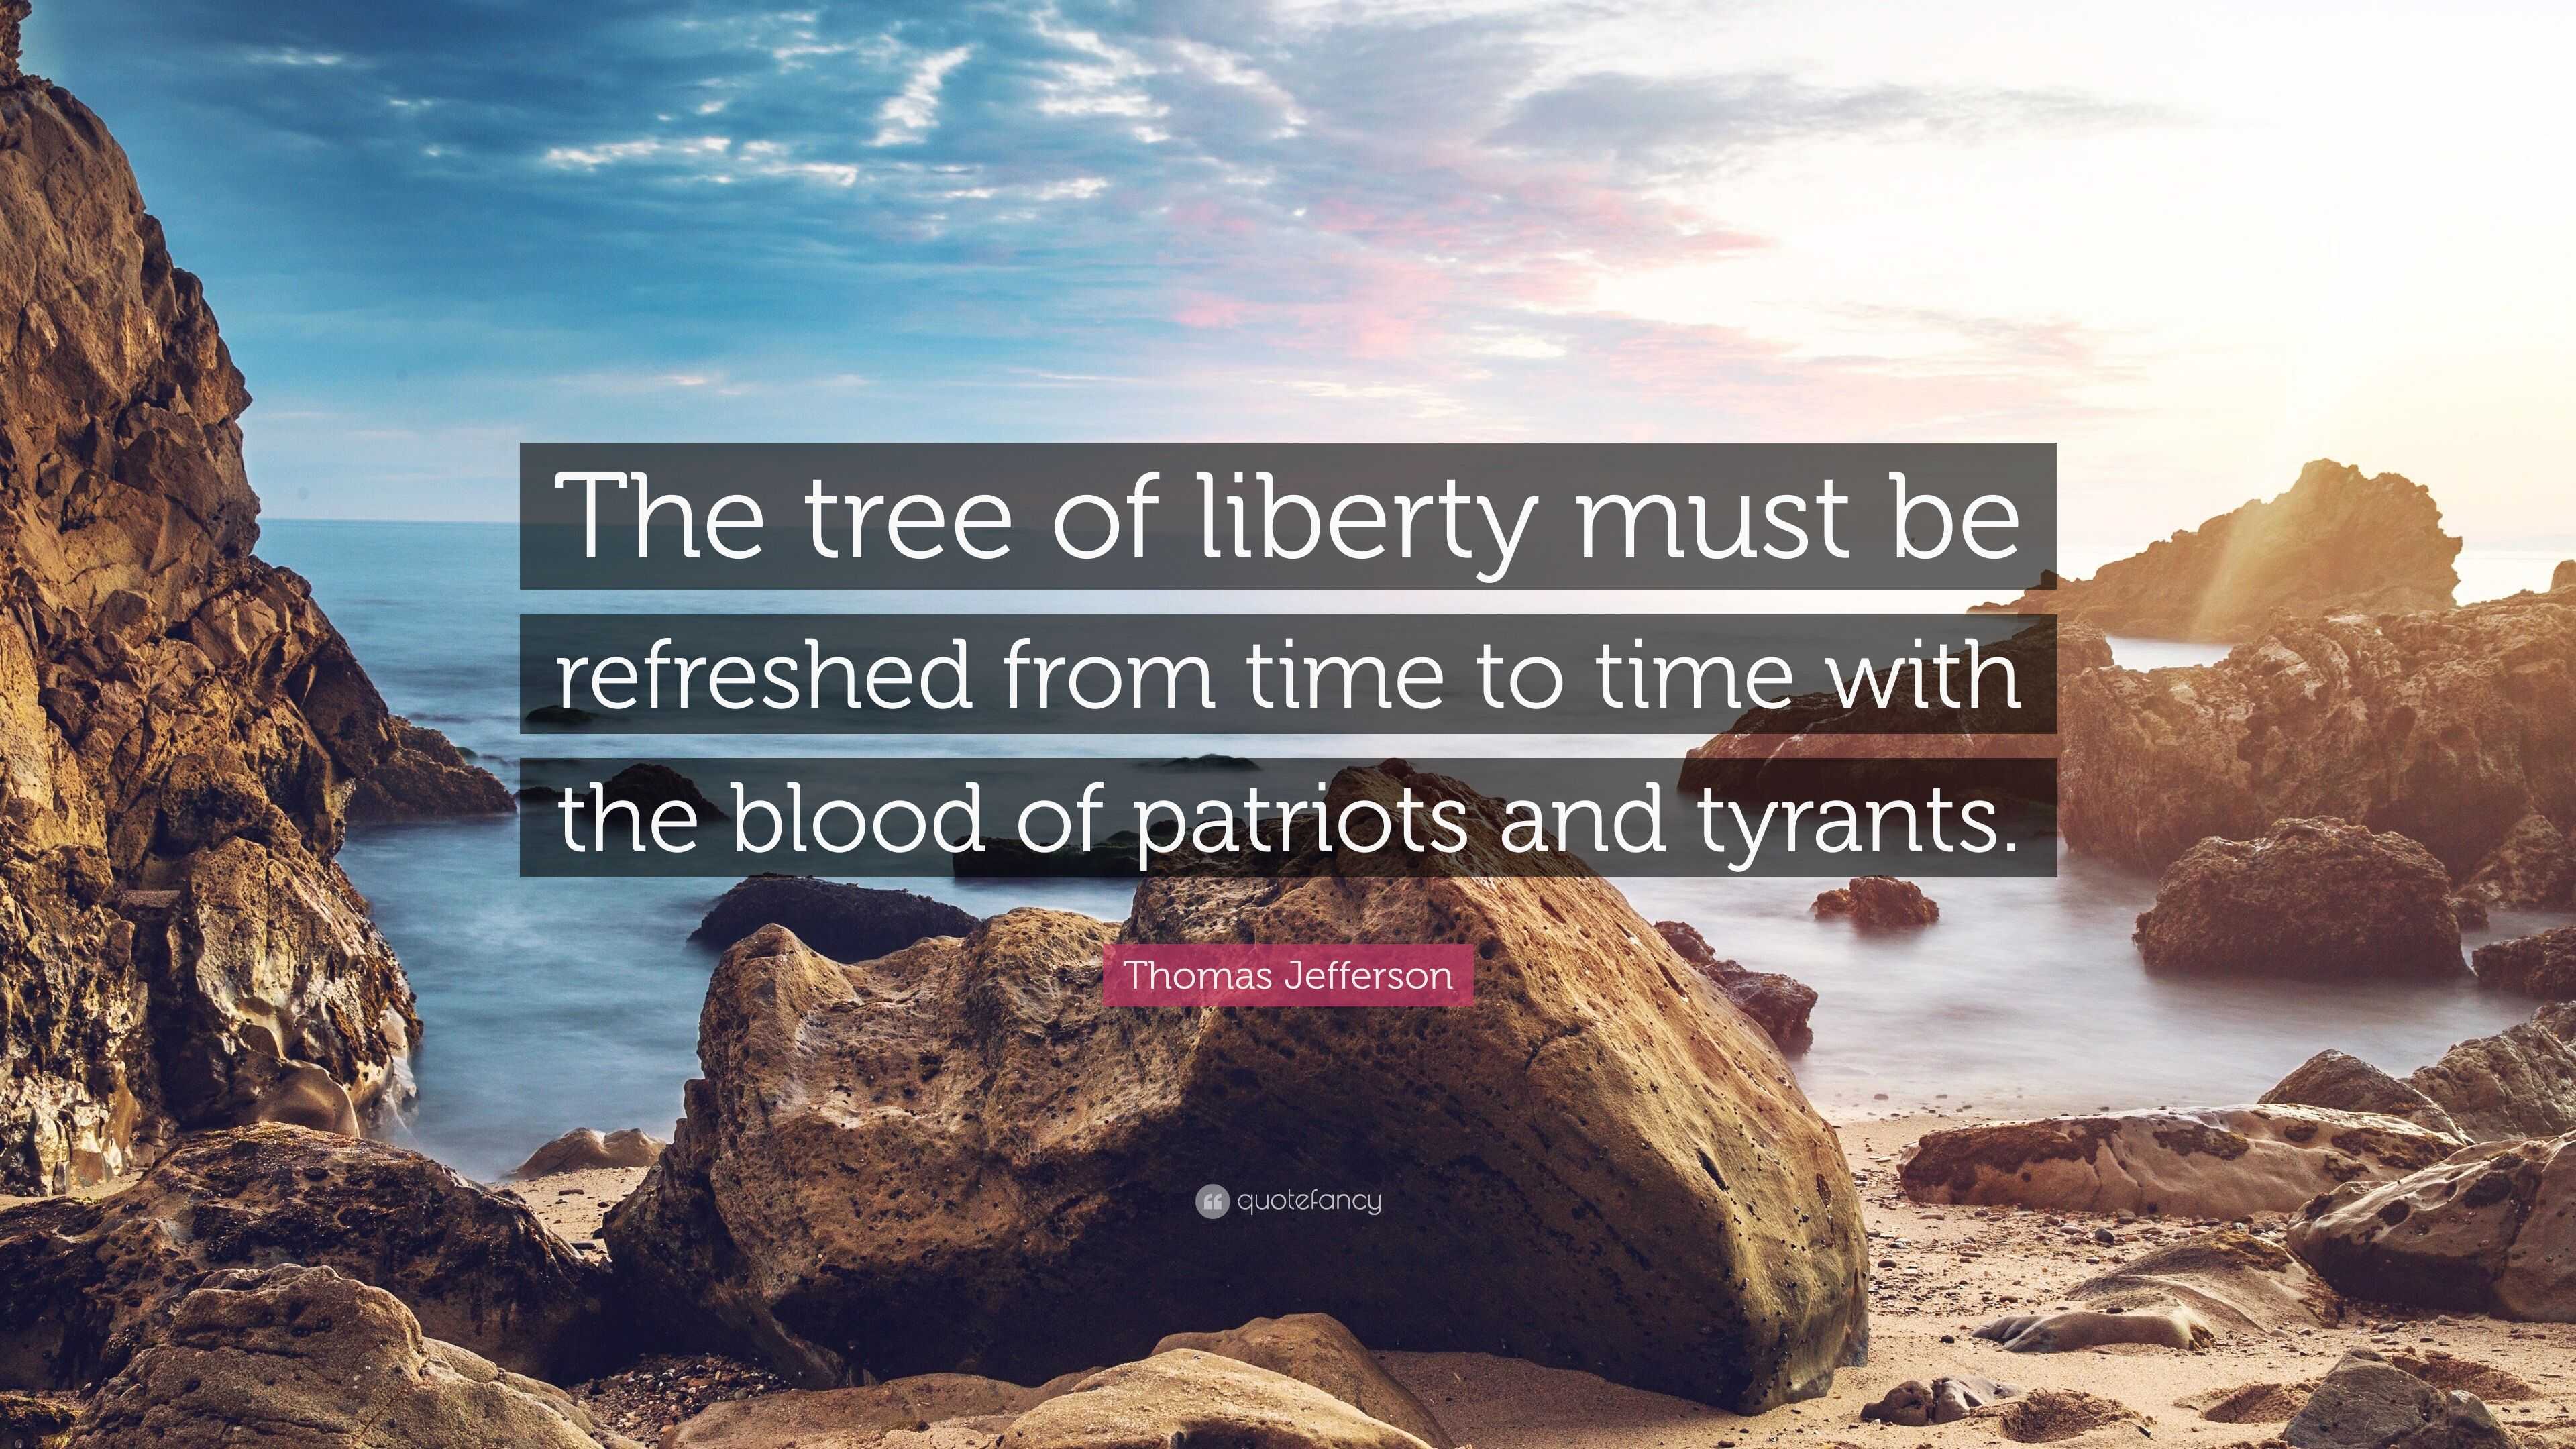 2017217 Thomas Jefferson Quote The tree of liberty must be refreshed from